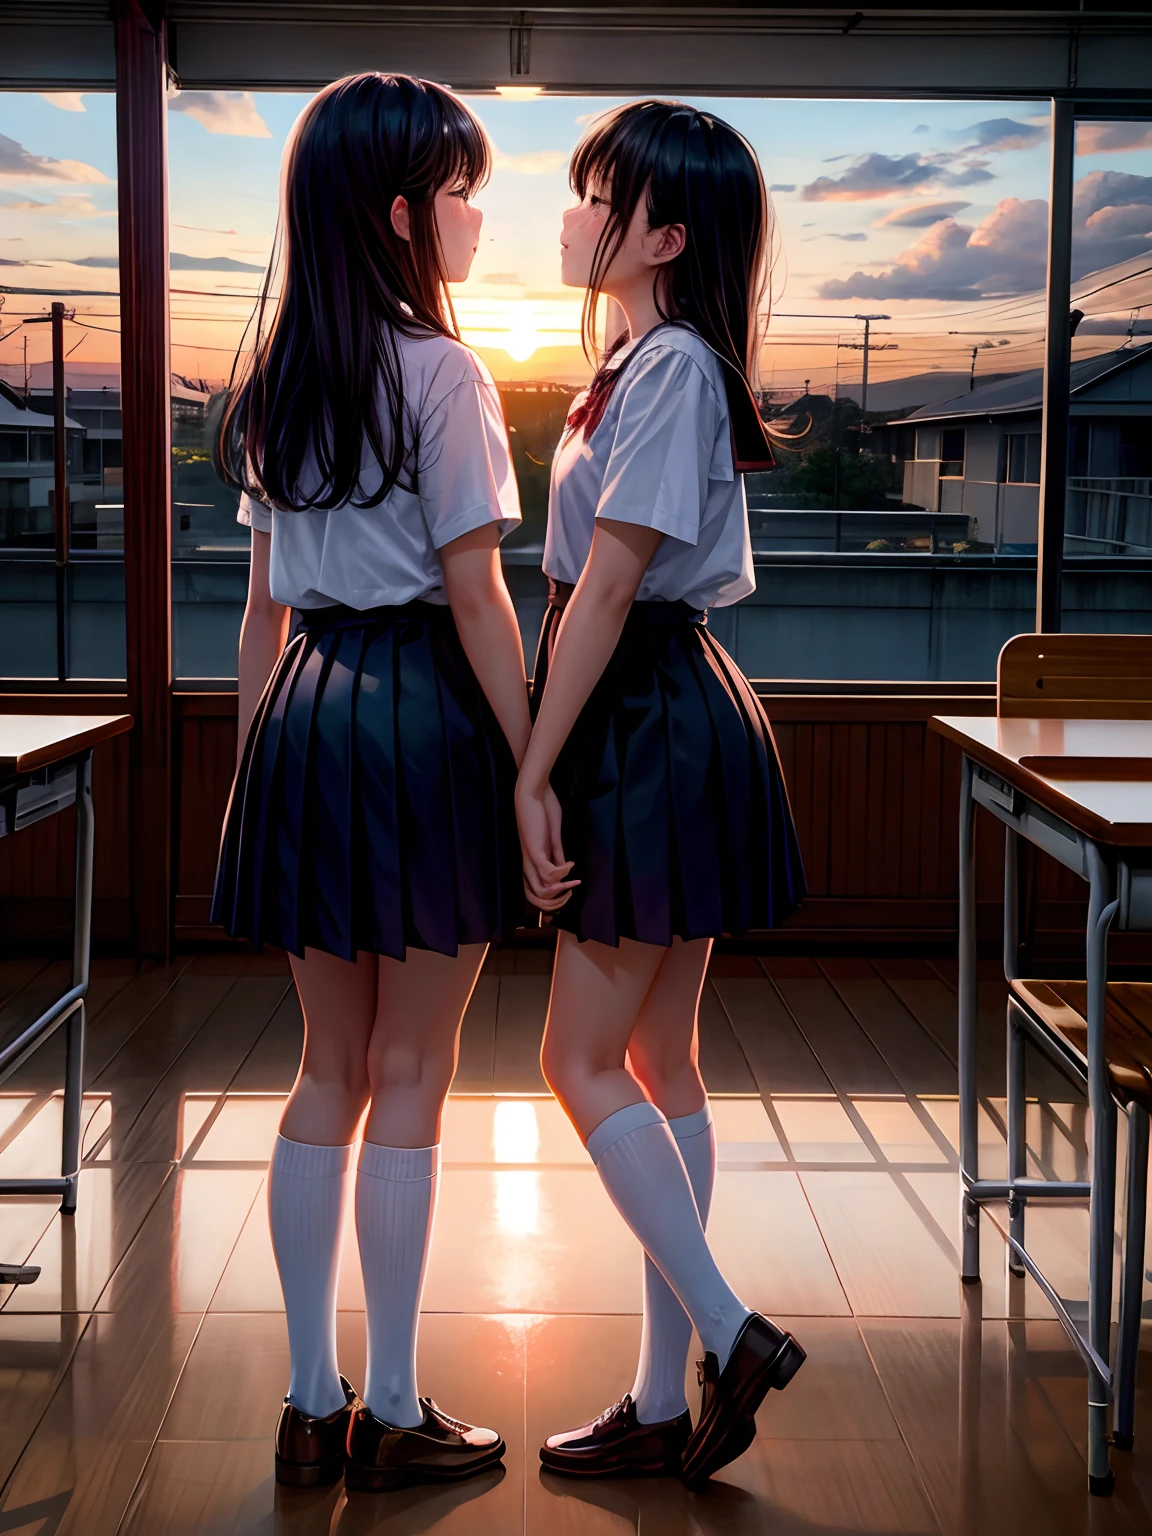 lighting like a movie、top-quality、school classrooms、Two high school girls hugging each other、Flushed face、the setting sun、At dusk、early evening、fullllbody、Full body、